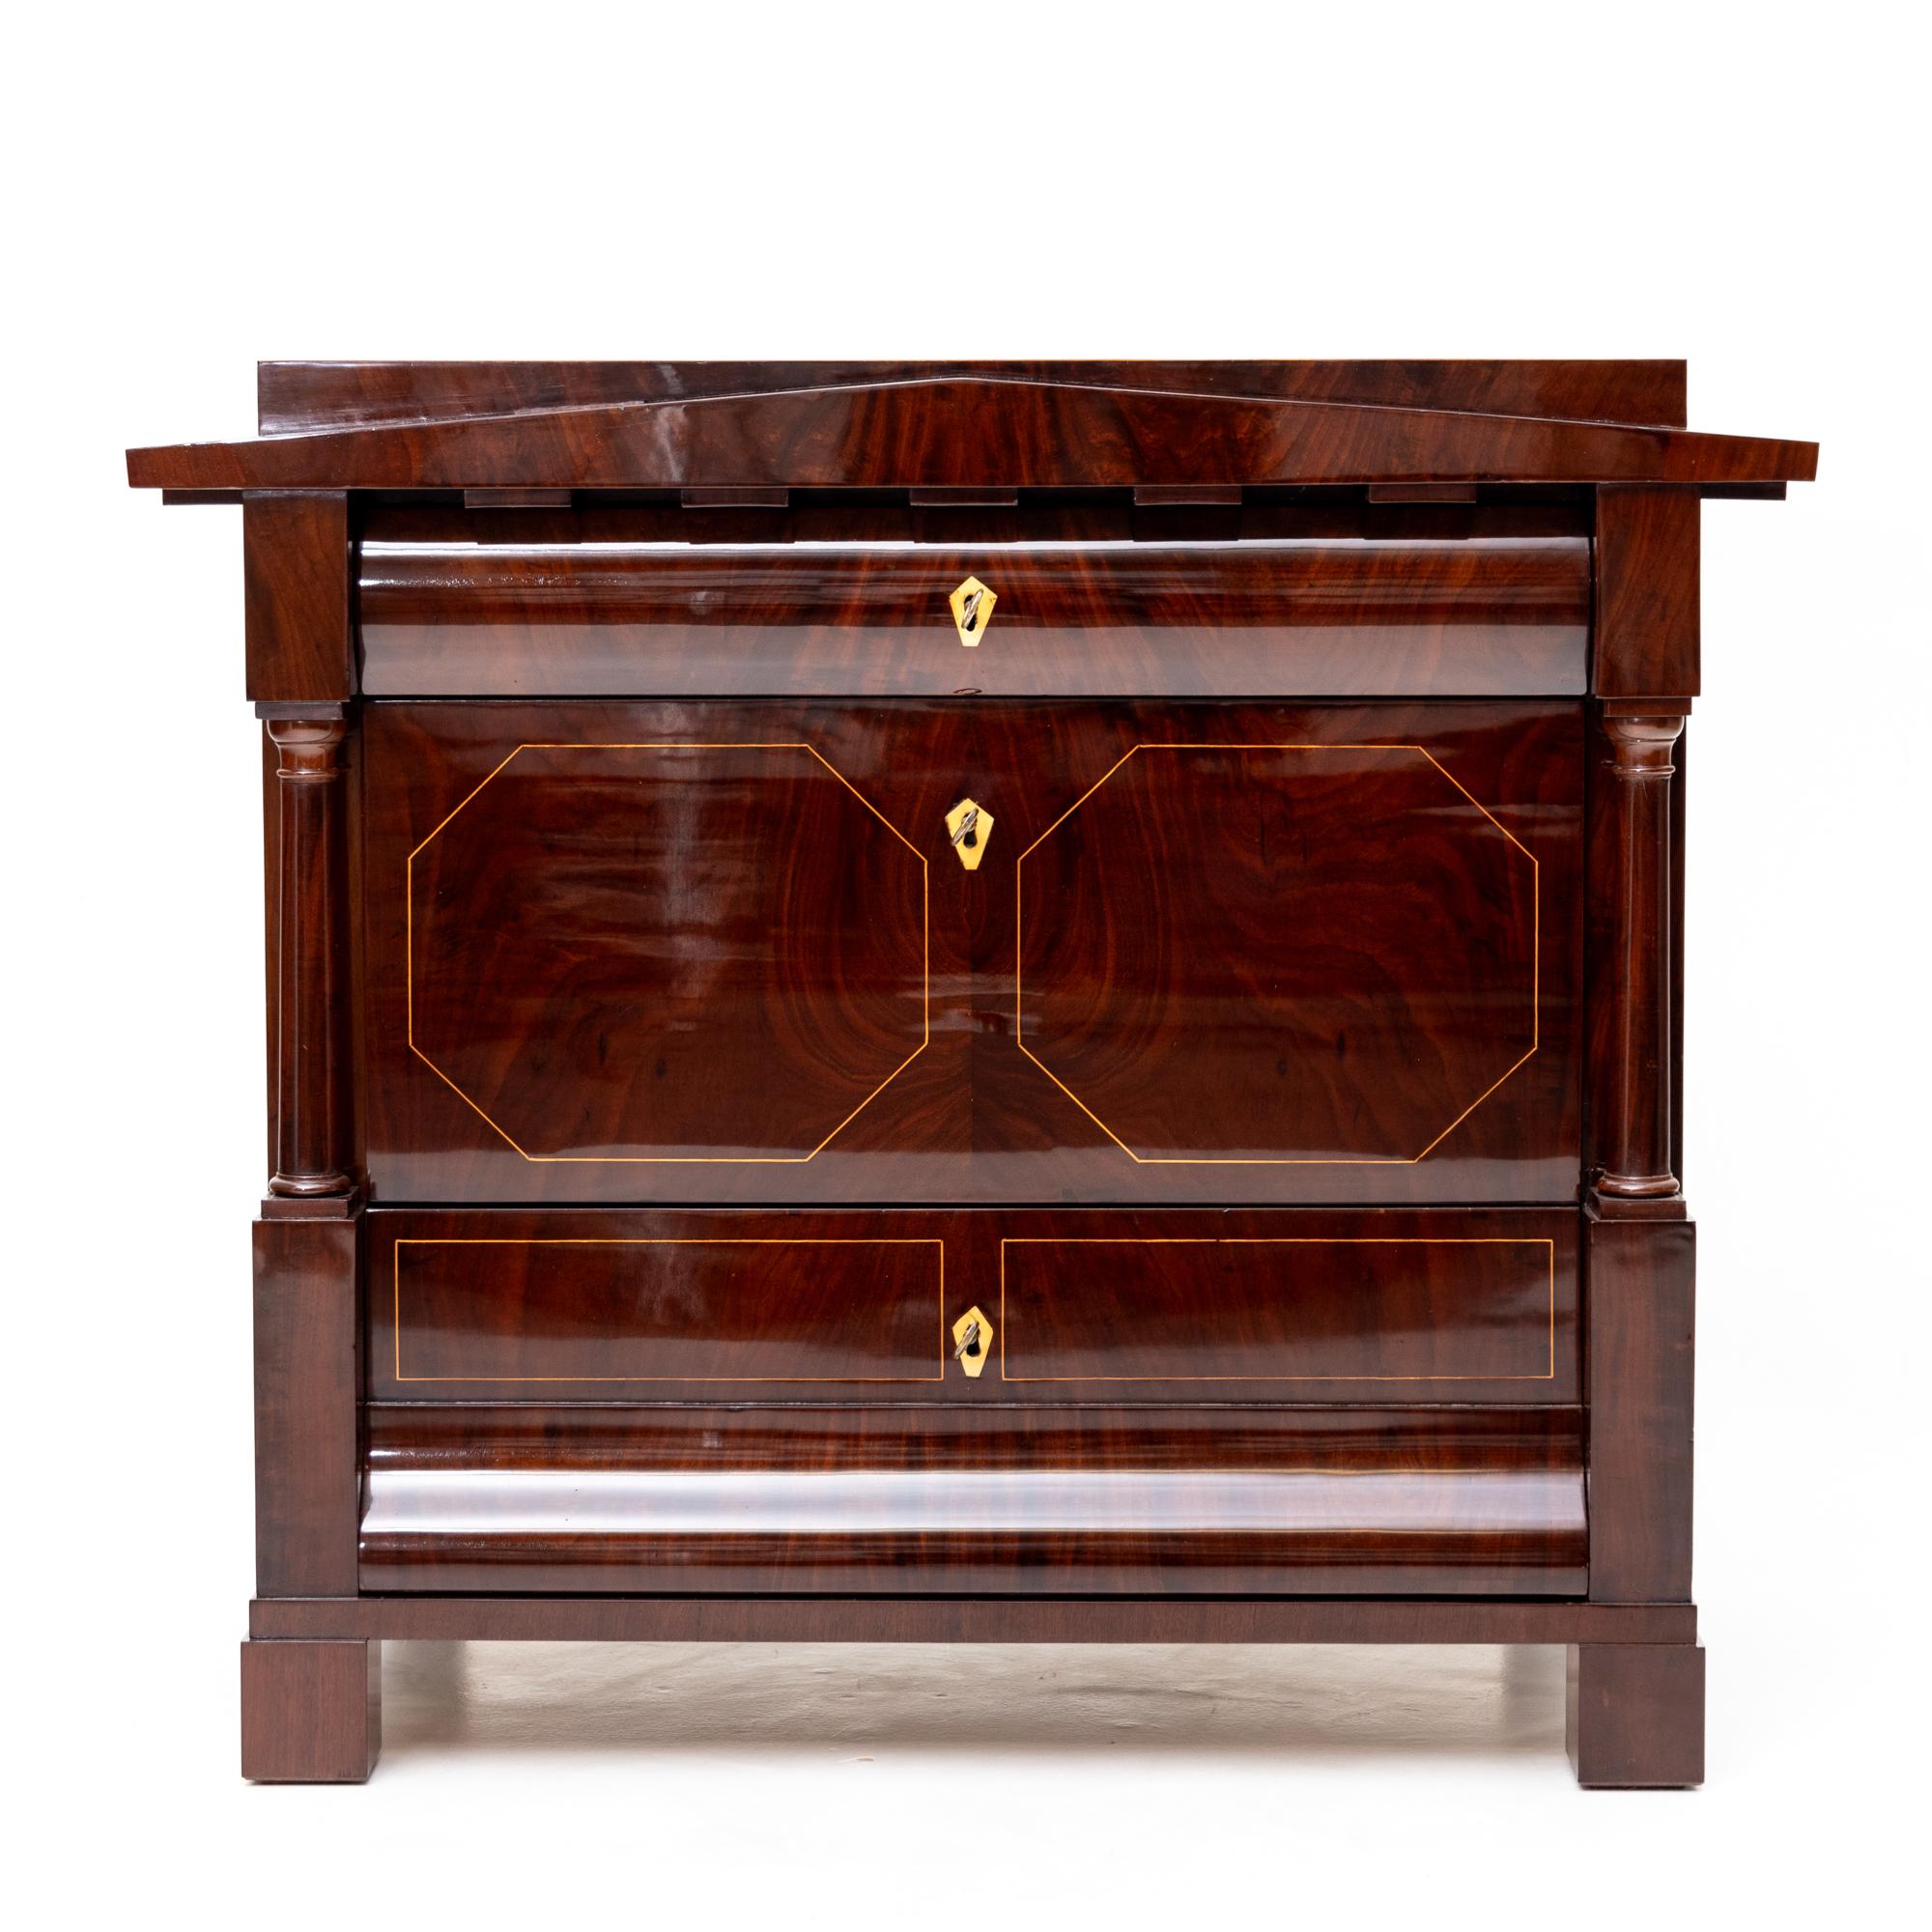 Biedermeier chest of drawers veneered in mahogany with light thread inlays on the front. The dresser features a triangular pediment with dentil frieze and is flanked on the sides by two column inlays. The matching wall mirror is also decorated with